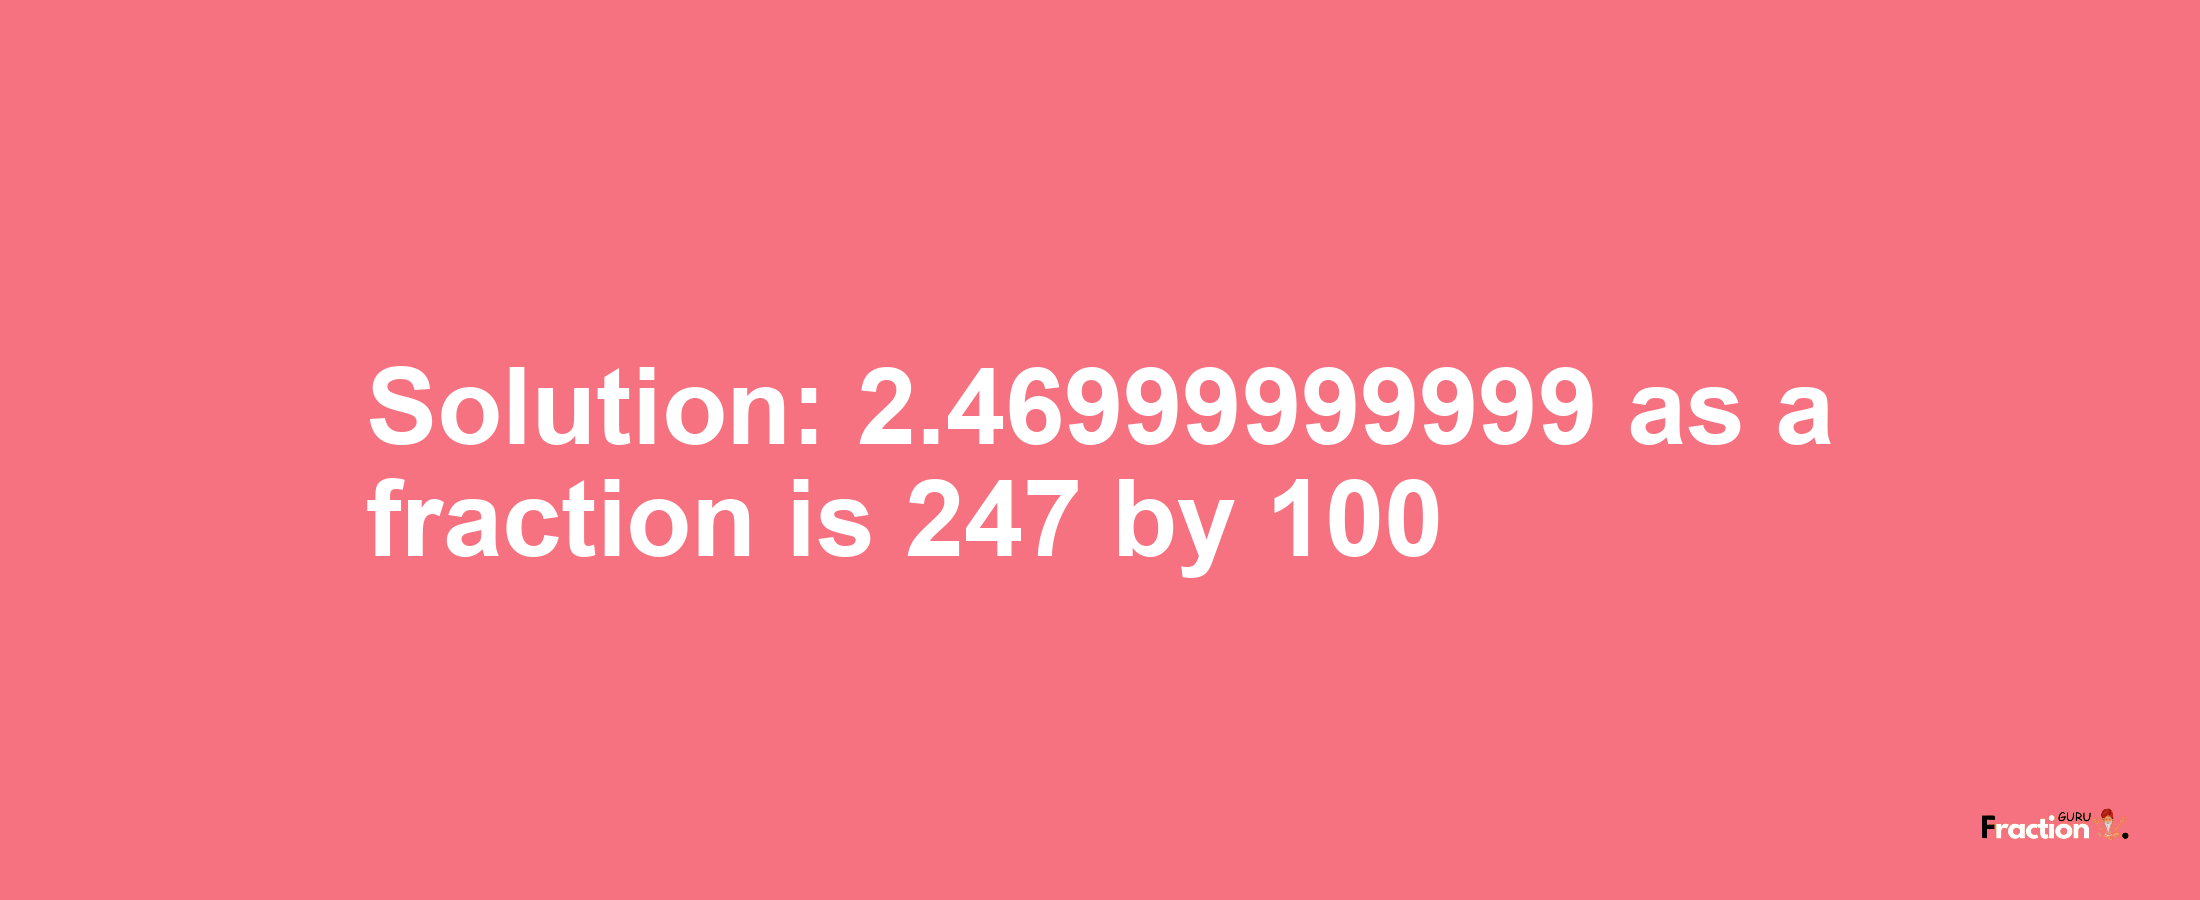 Solution:2.46999999999 as a fraction is 247/100